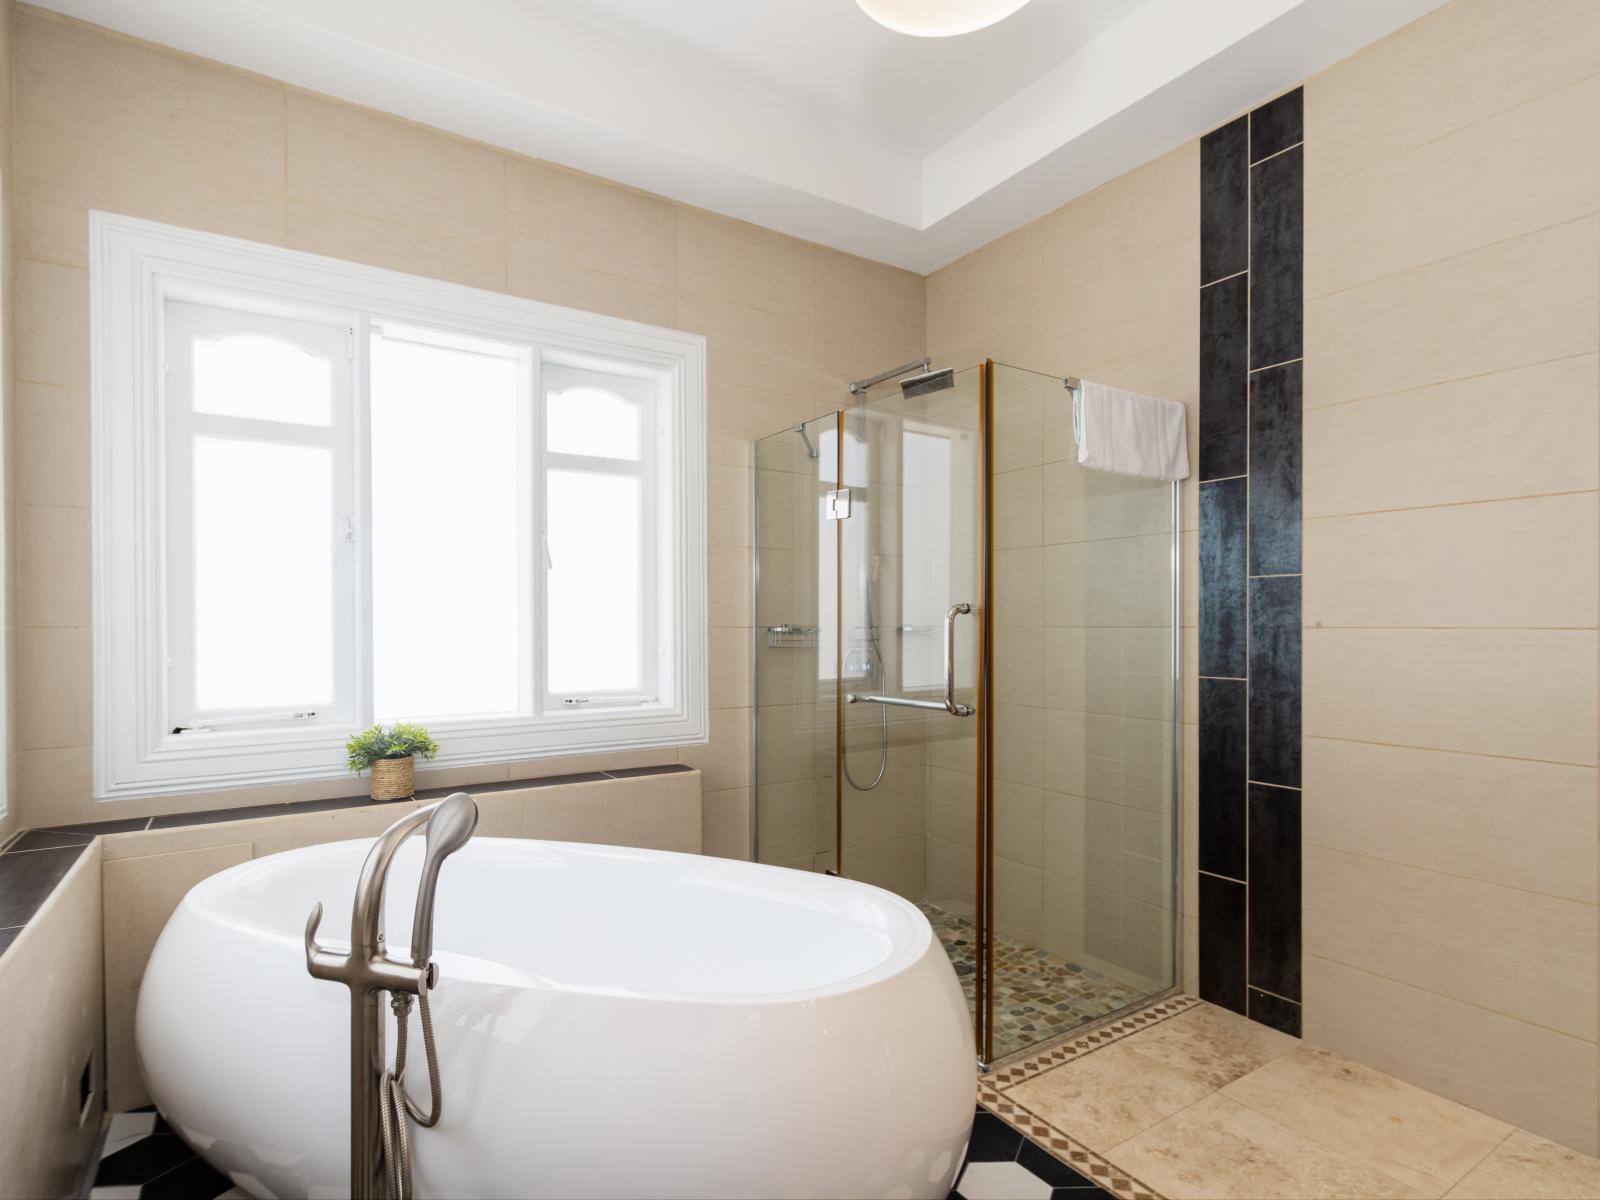 Stylish Bathroom of the Apartment in Noord Aruba - Glass-enclosed shower area - Spa-like atmosphere with a modern, superb bathtub - Elegant bathroom with luxurious fixtures and finishes